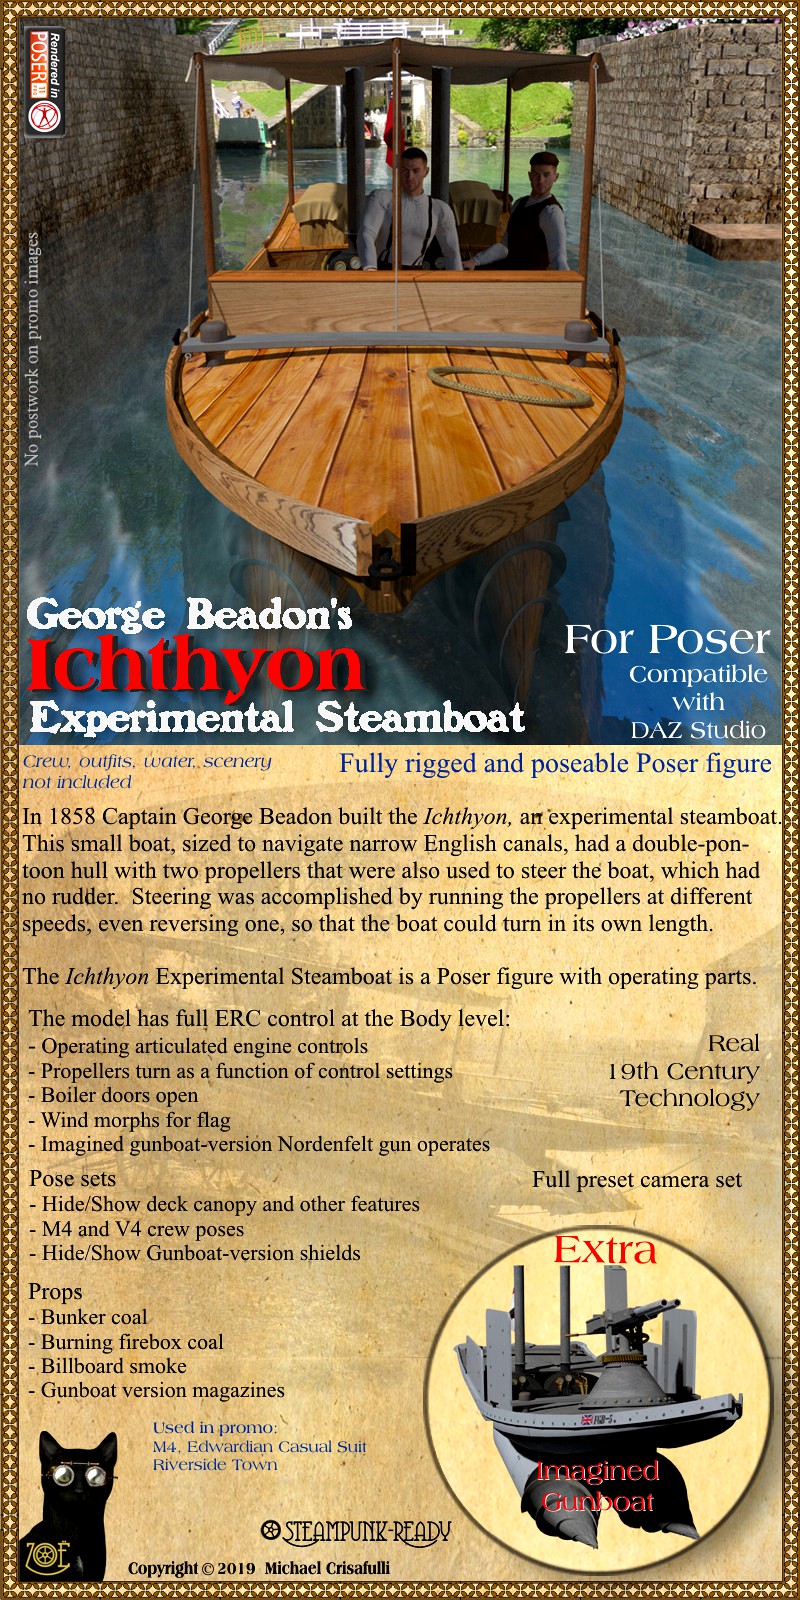 Ichthyon Experimental Steamboat